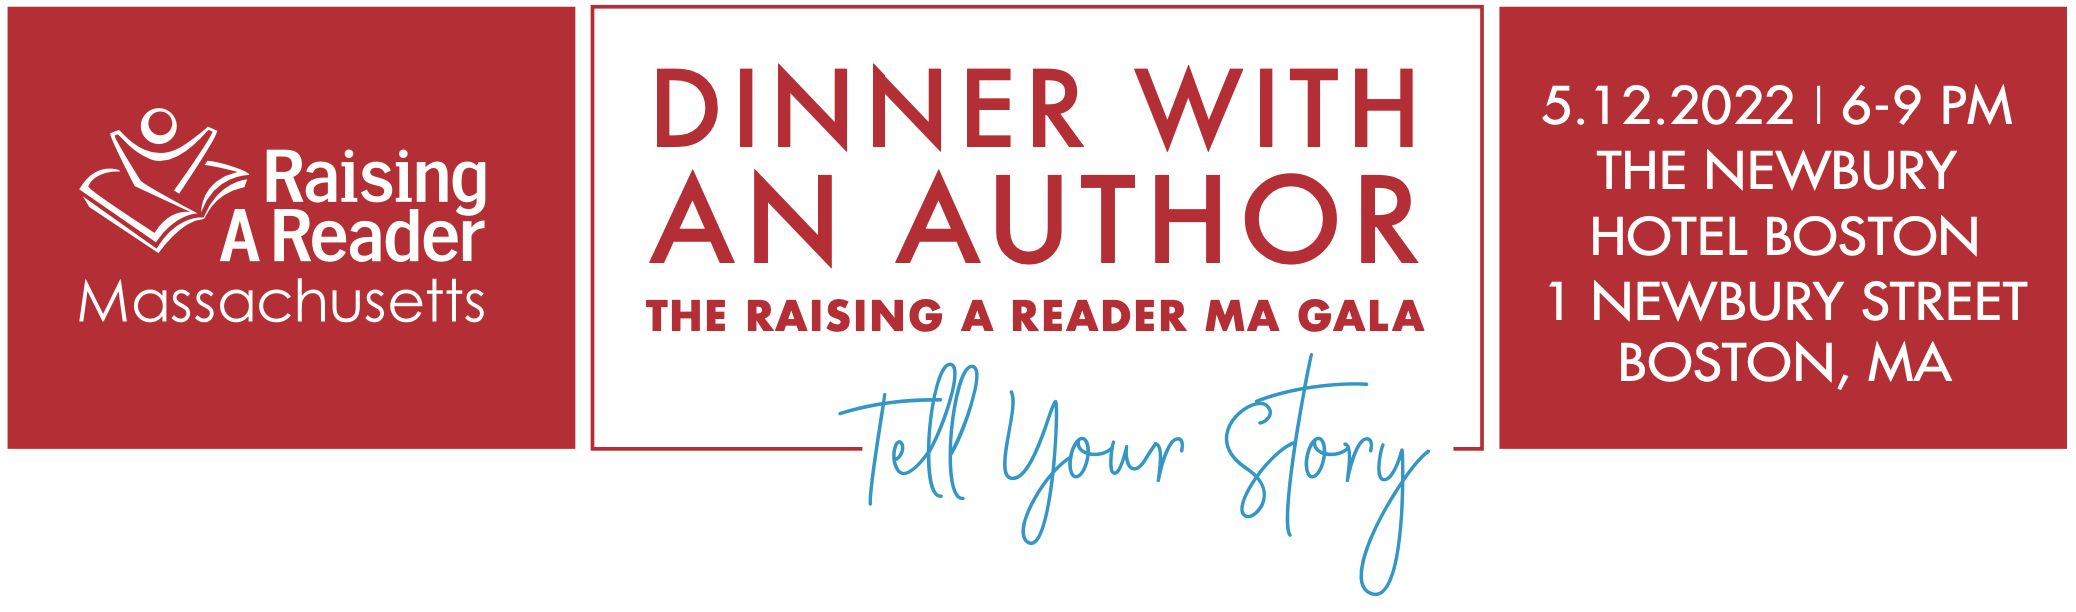 The Raising A Reader Massachusetts Gala - Dinner with an Author - Tell Your Story